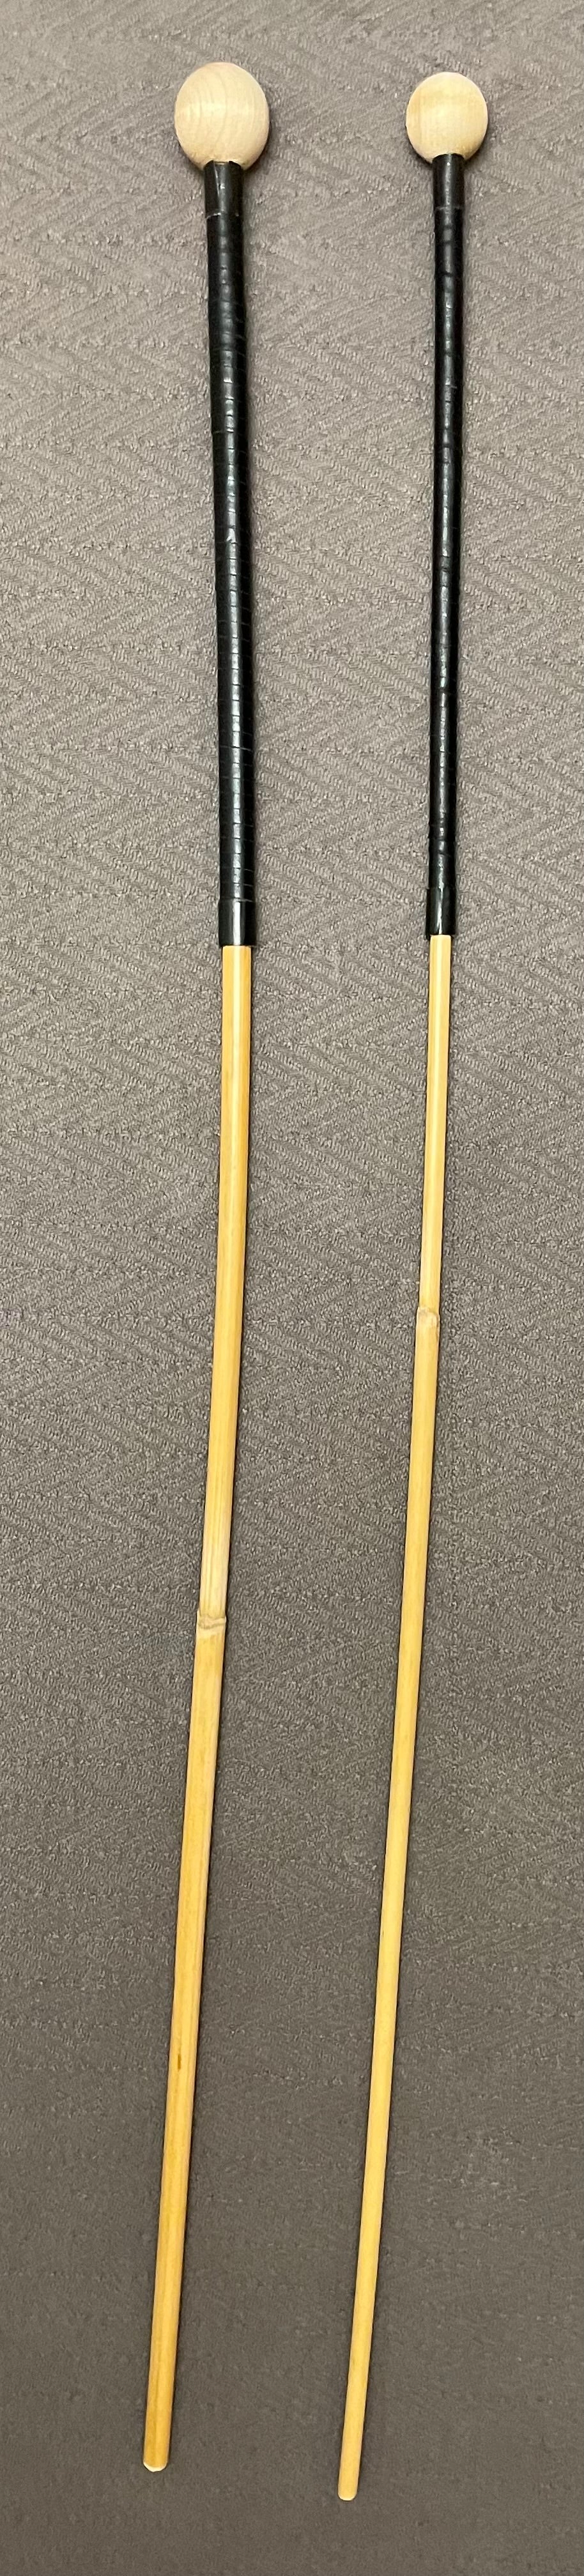 Equestrian Trainer Classic Dragon Rattan Cane Pair with Black Kangaroo Leather Handles - 95 to 105 cms Length